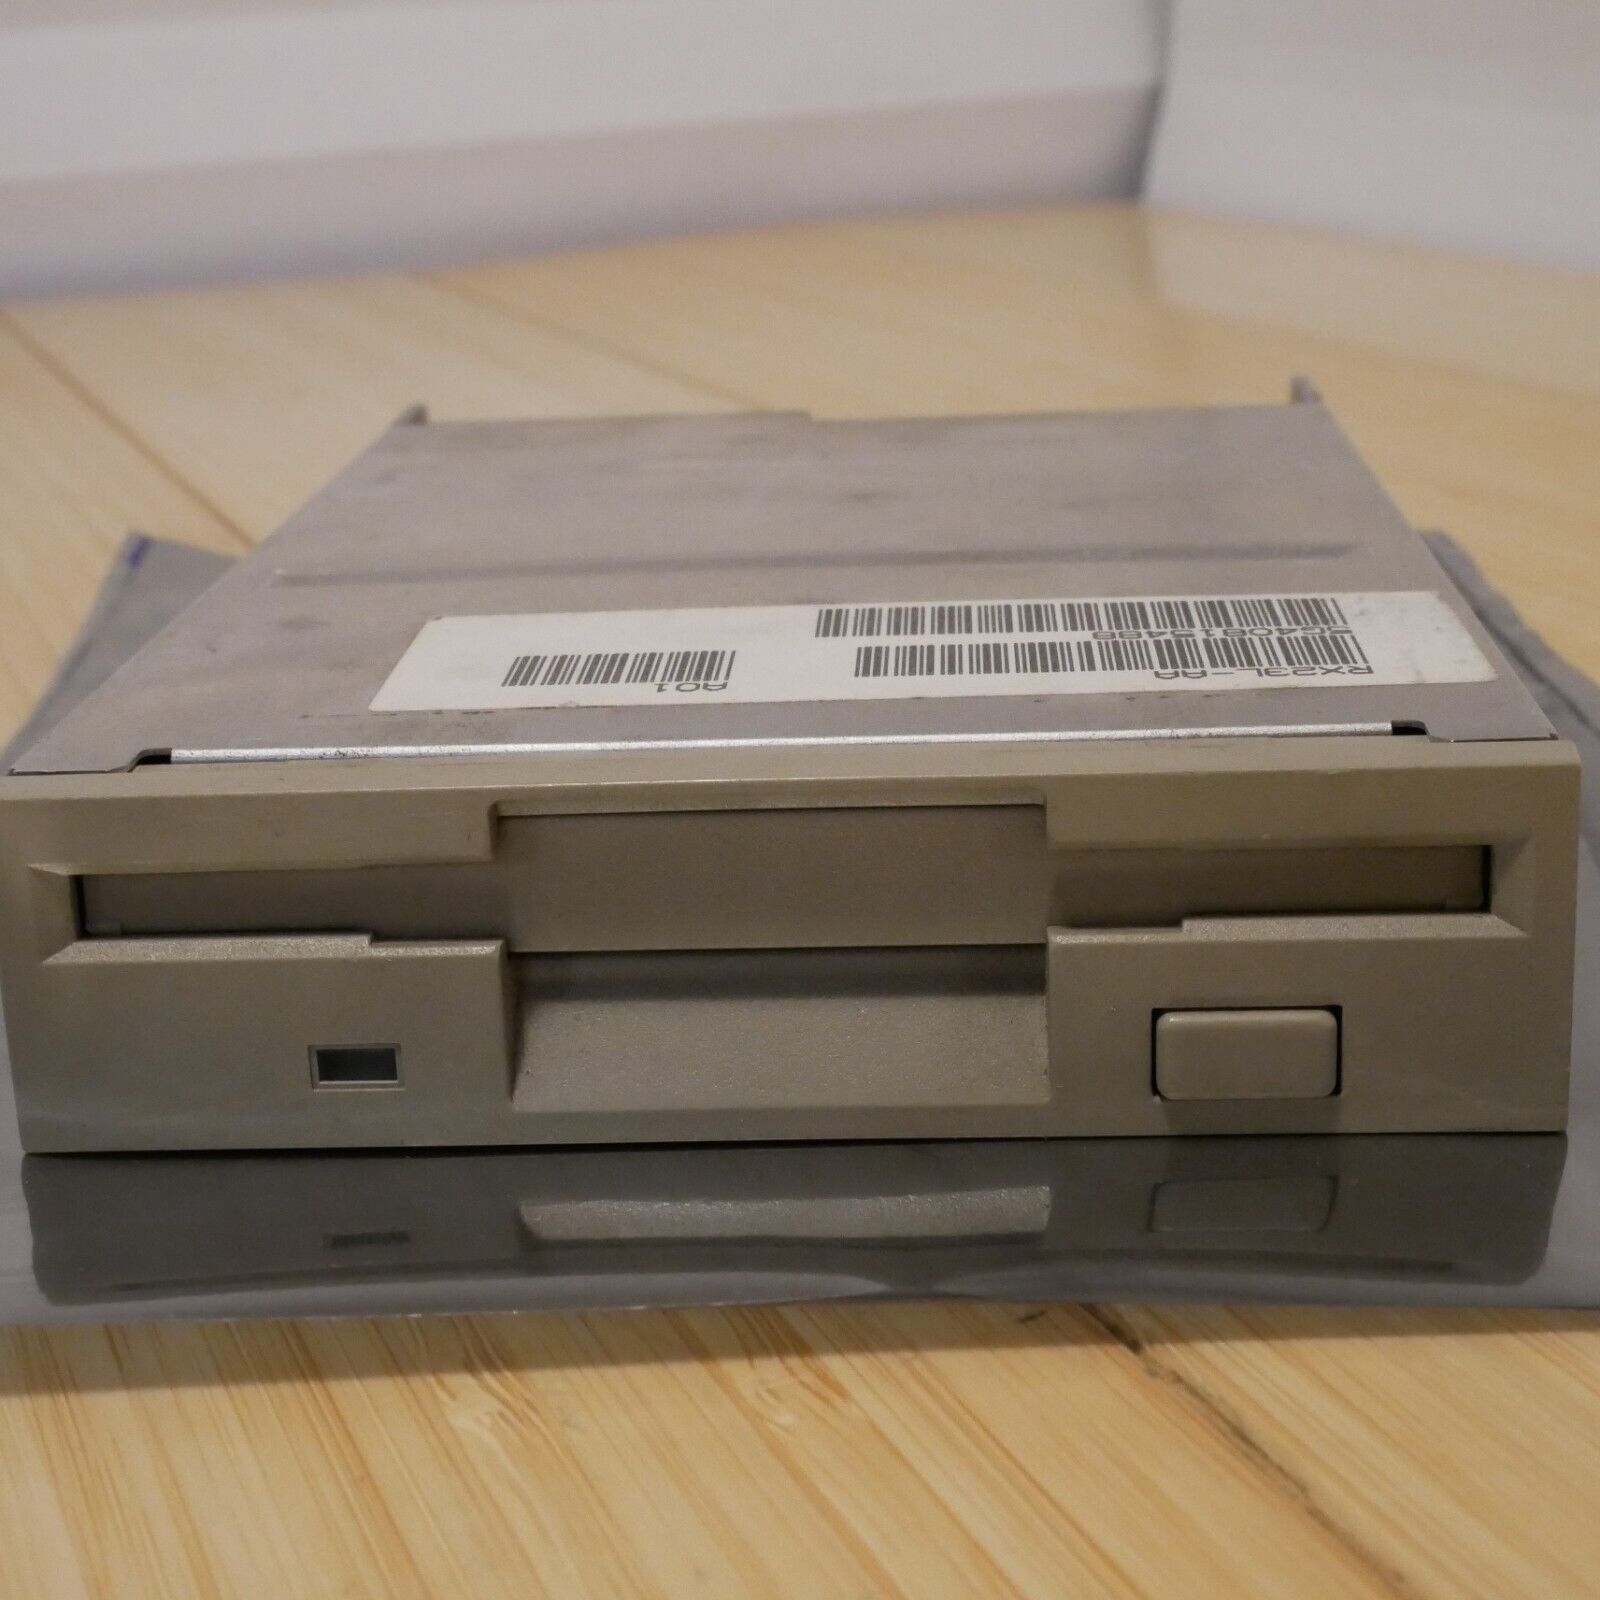 TEAC 3.5 inch Internal Floppy Disk Drive Model FD-235HF Tested & Working - 26 - $51.41